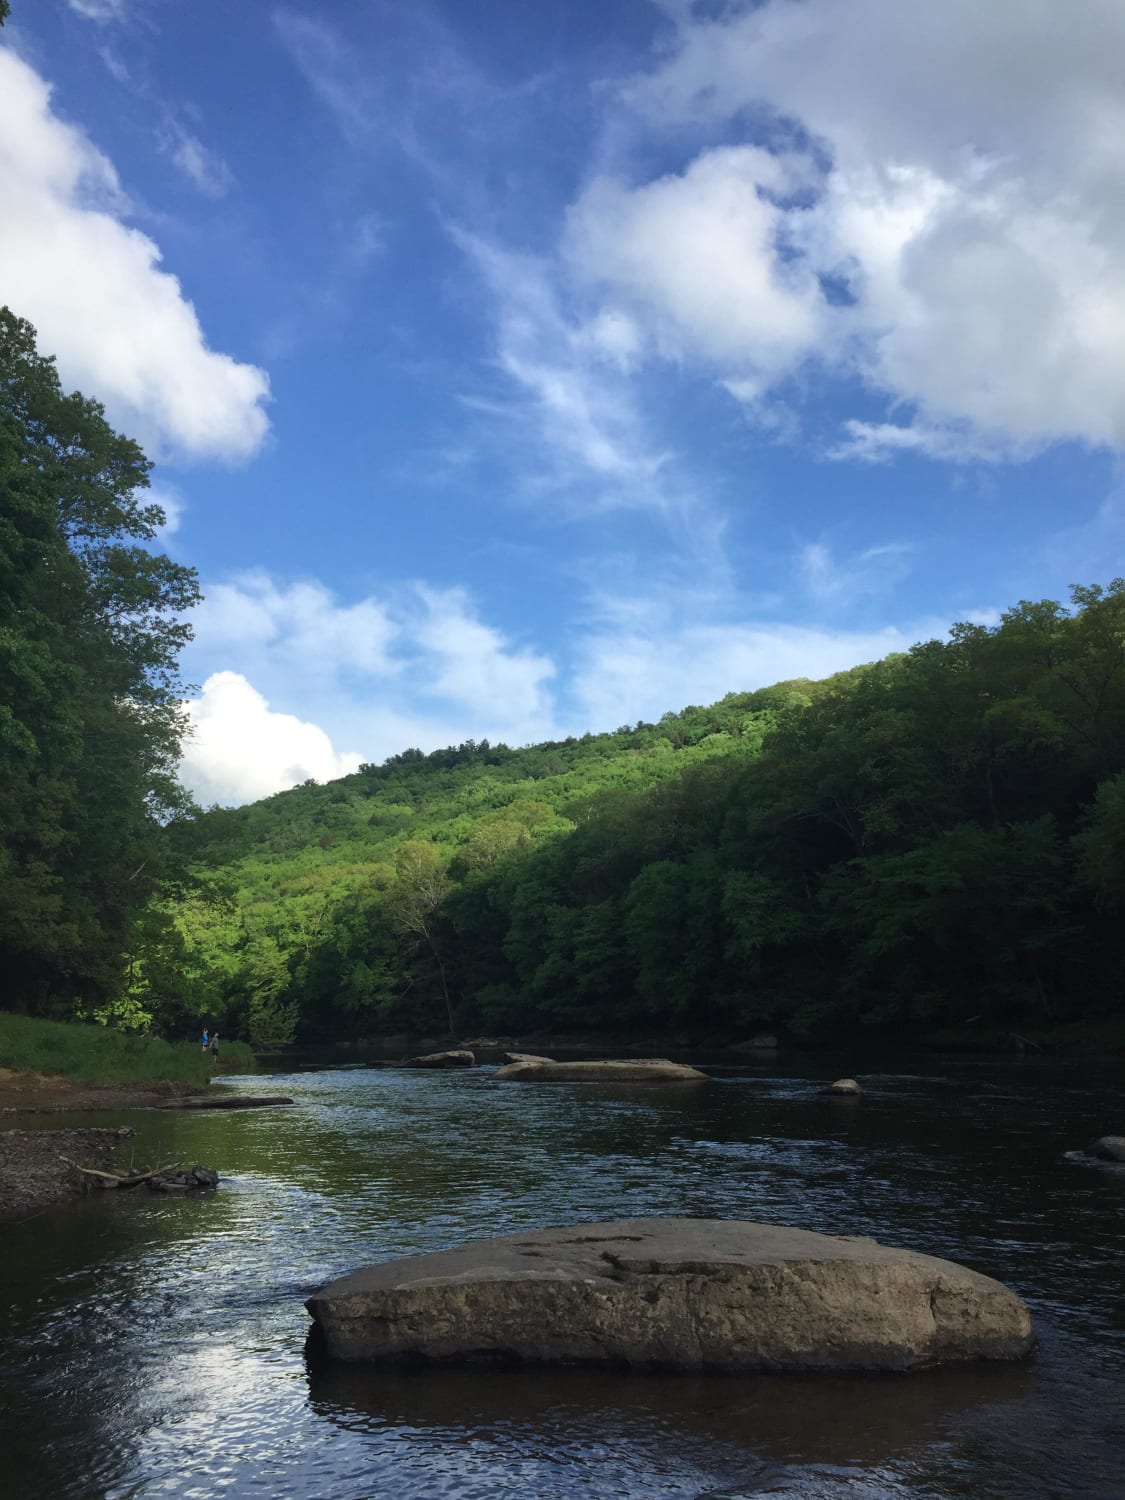 Clarion river at Cook Forest state park in PA